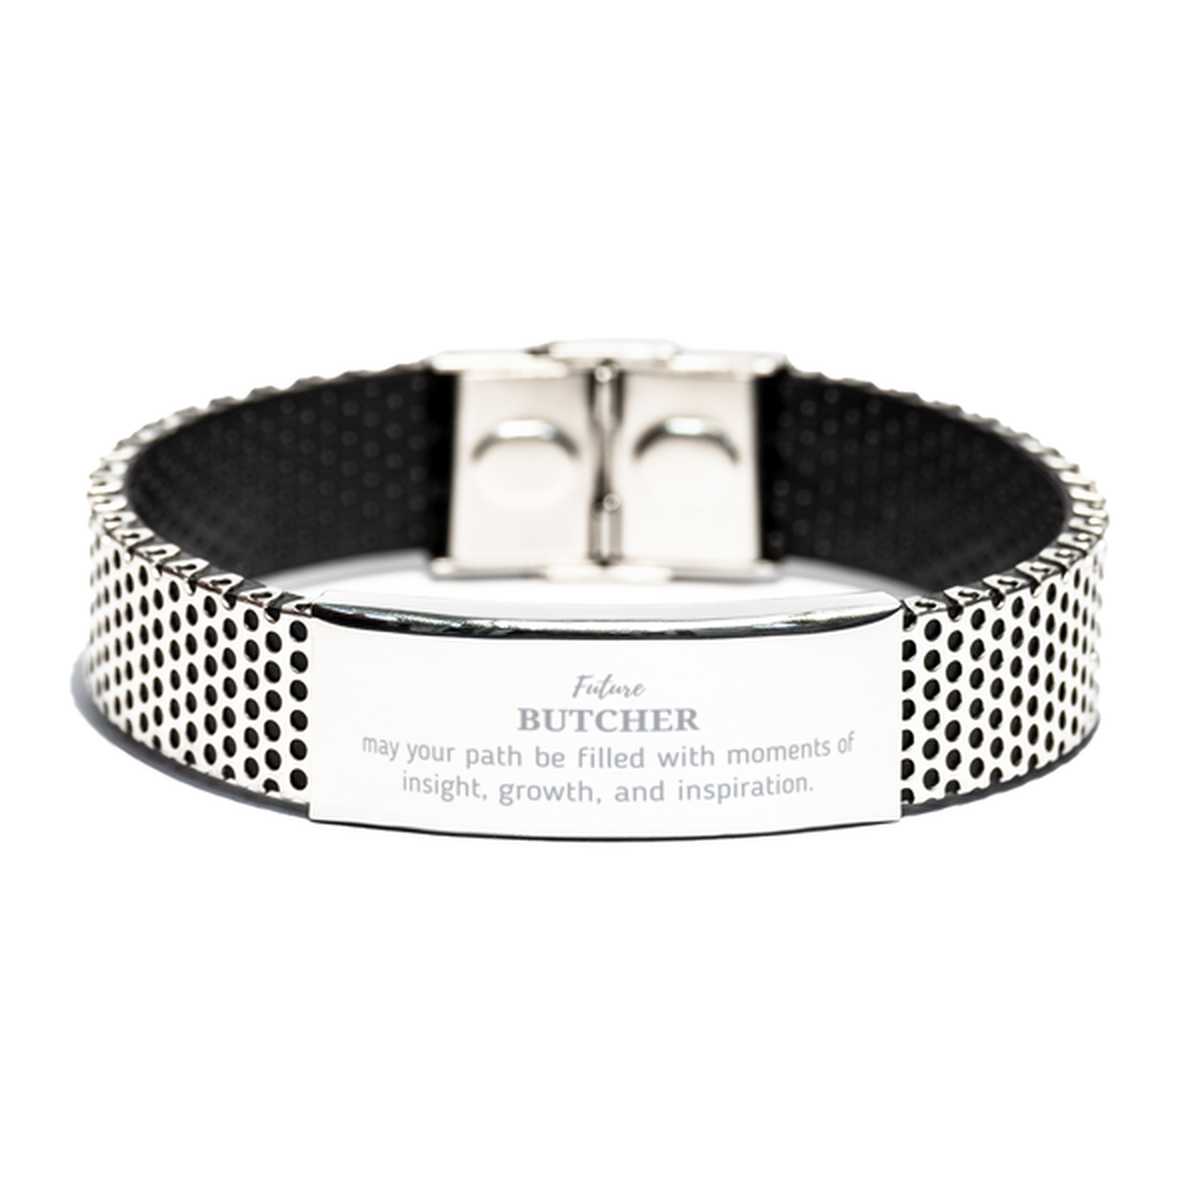 Future Butcher Gifts, May your path be filled with moments of insight, Graduation Gifts for New Butcher, Christmas Unique Stainless Steel Bracelet For Men, Women, Friends